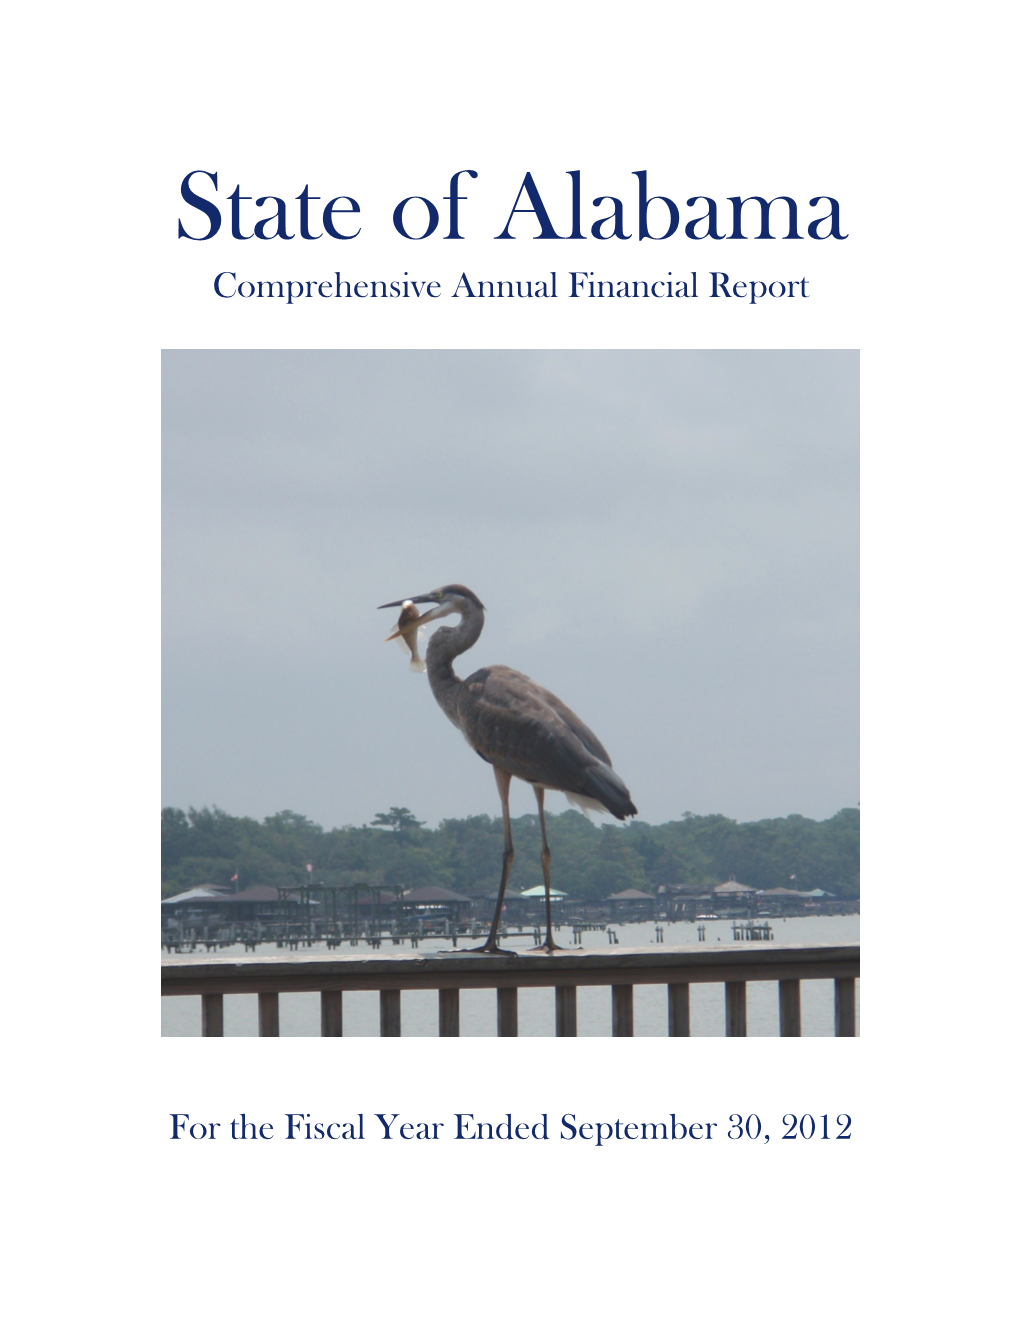 State of Alabama Comprehensive Annual Financial Report